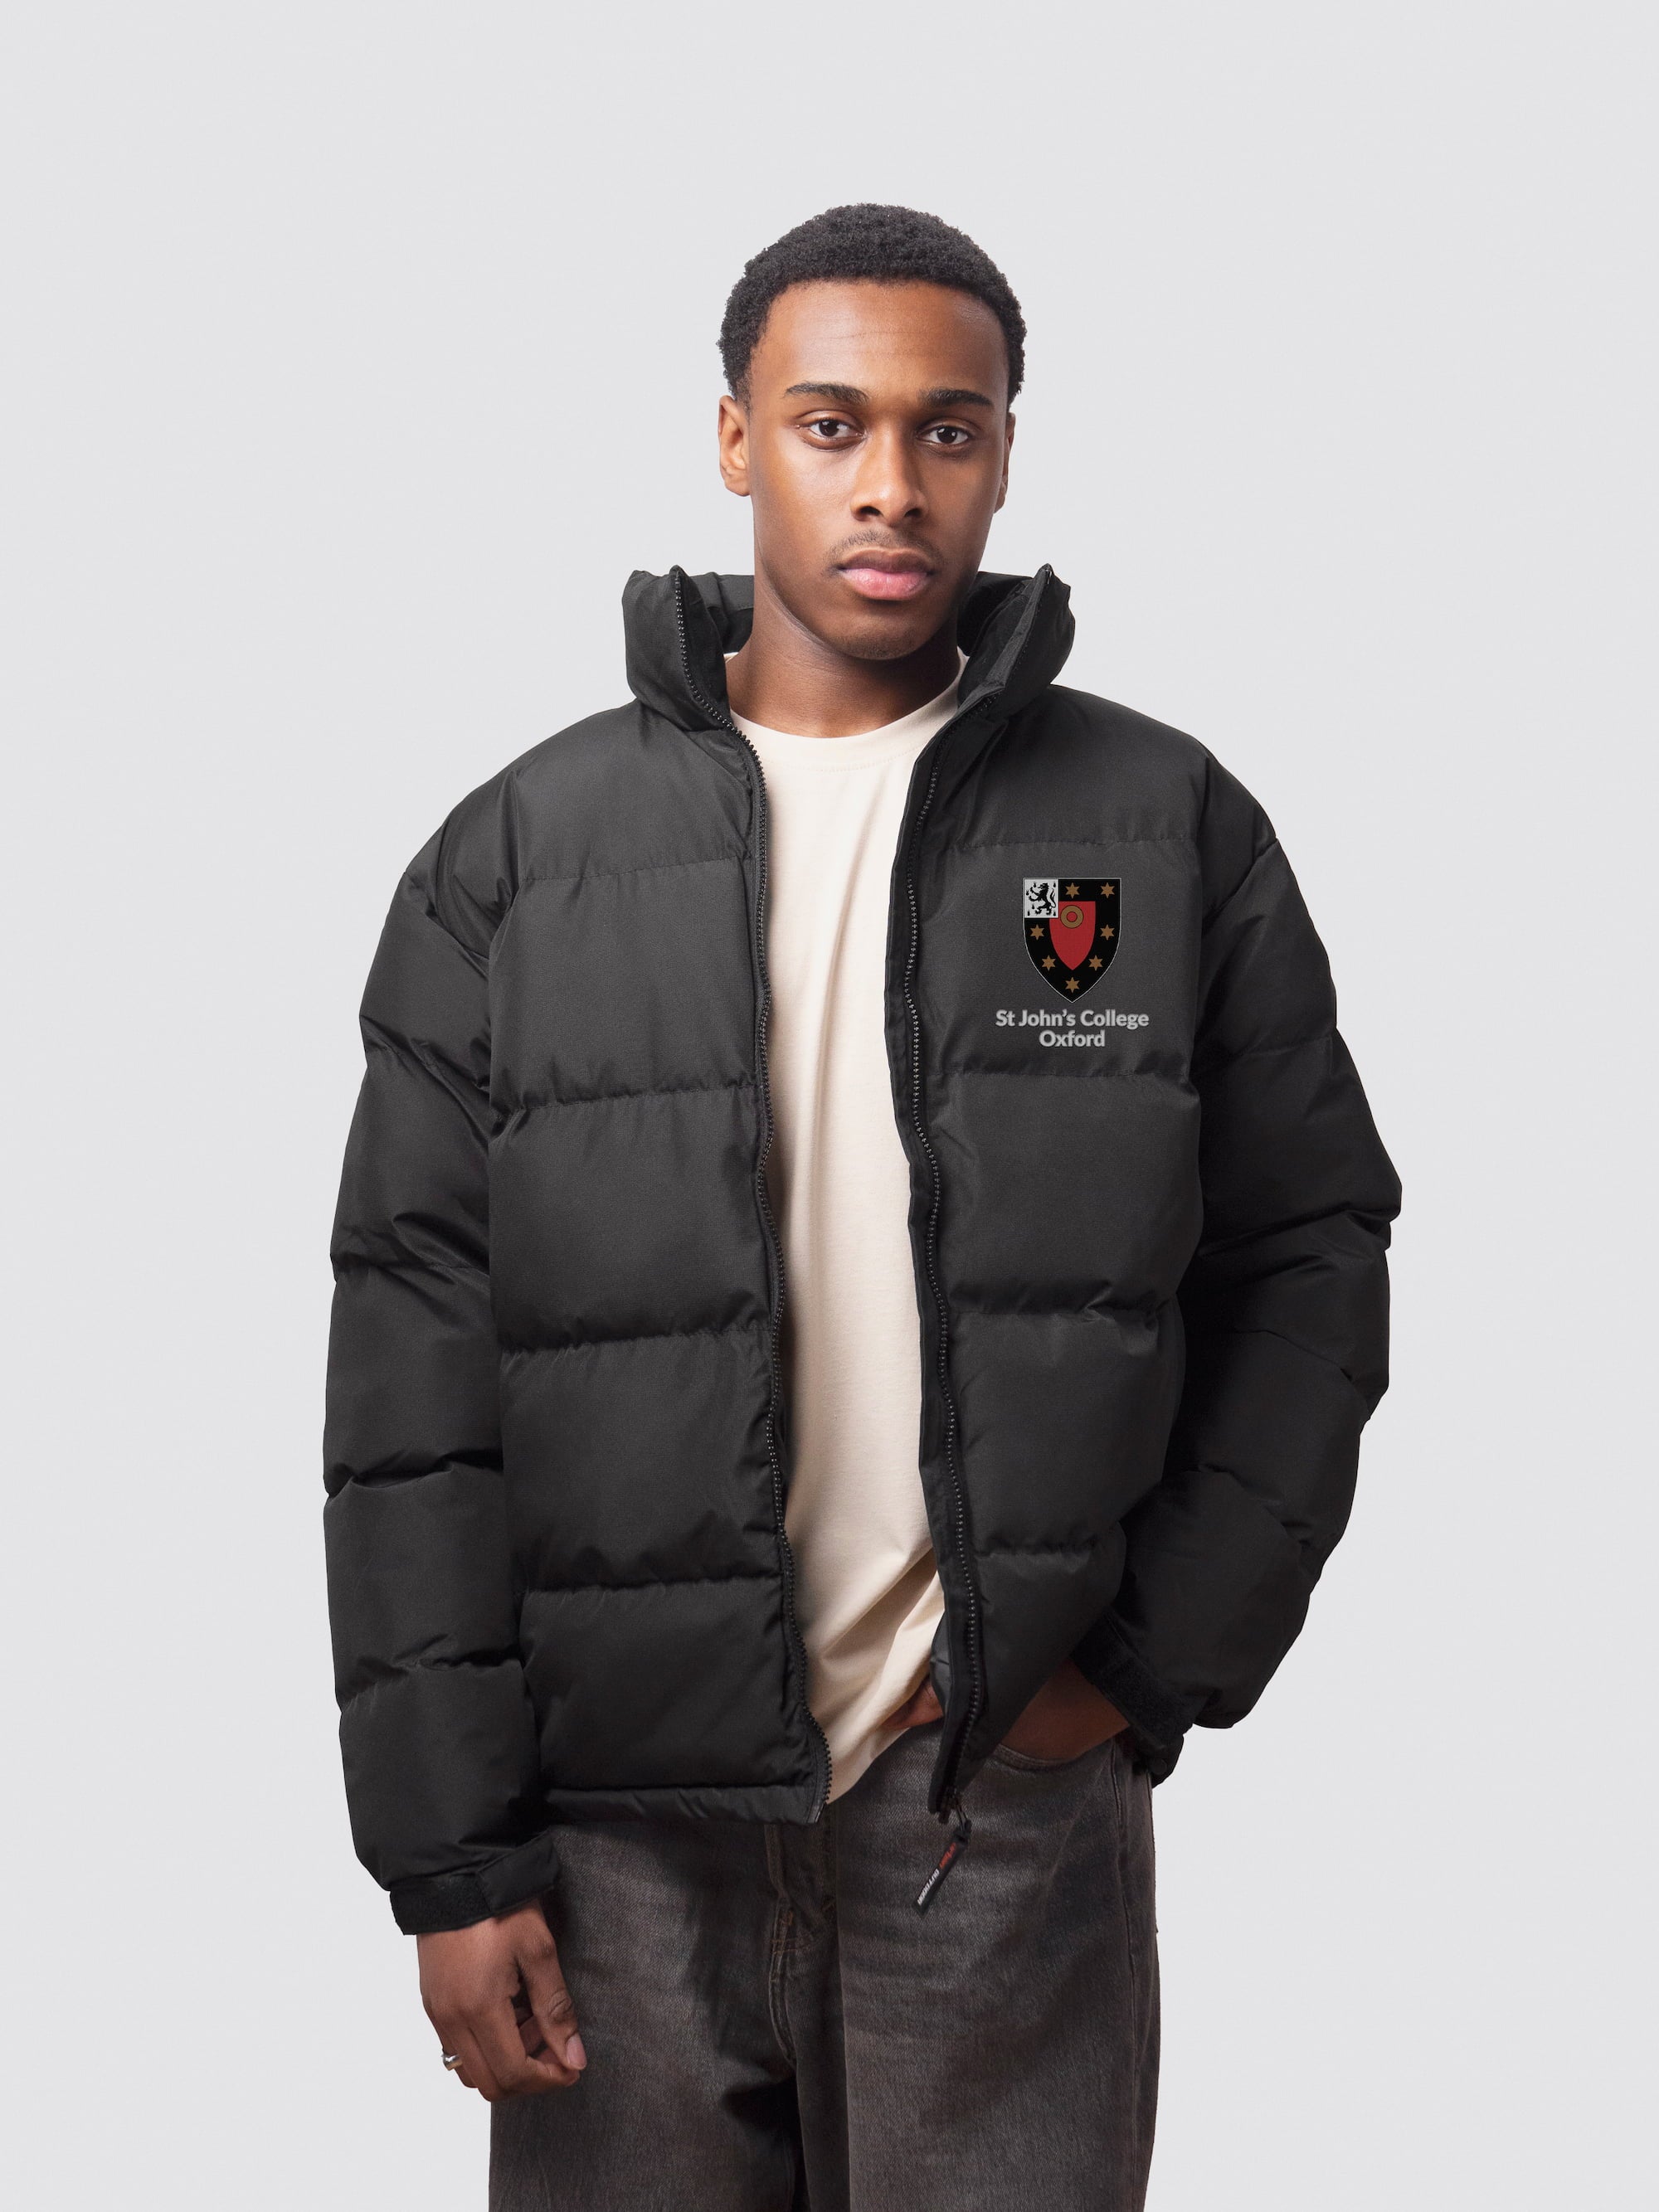 A student wearing a black college puffer jacket, with an embroidered left-chest logo